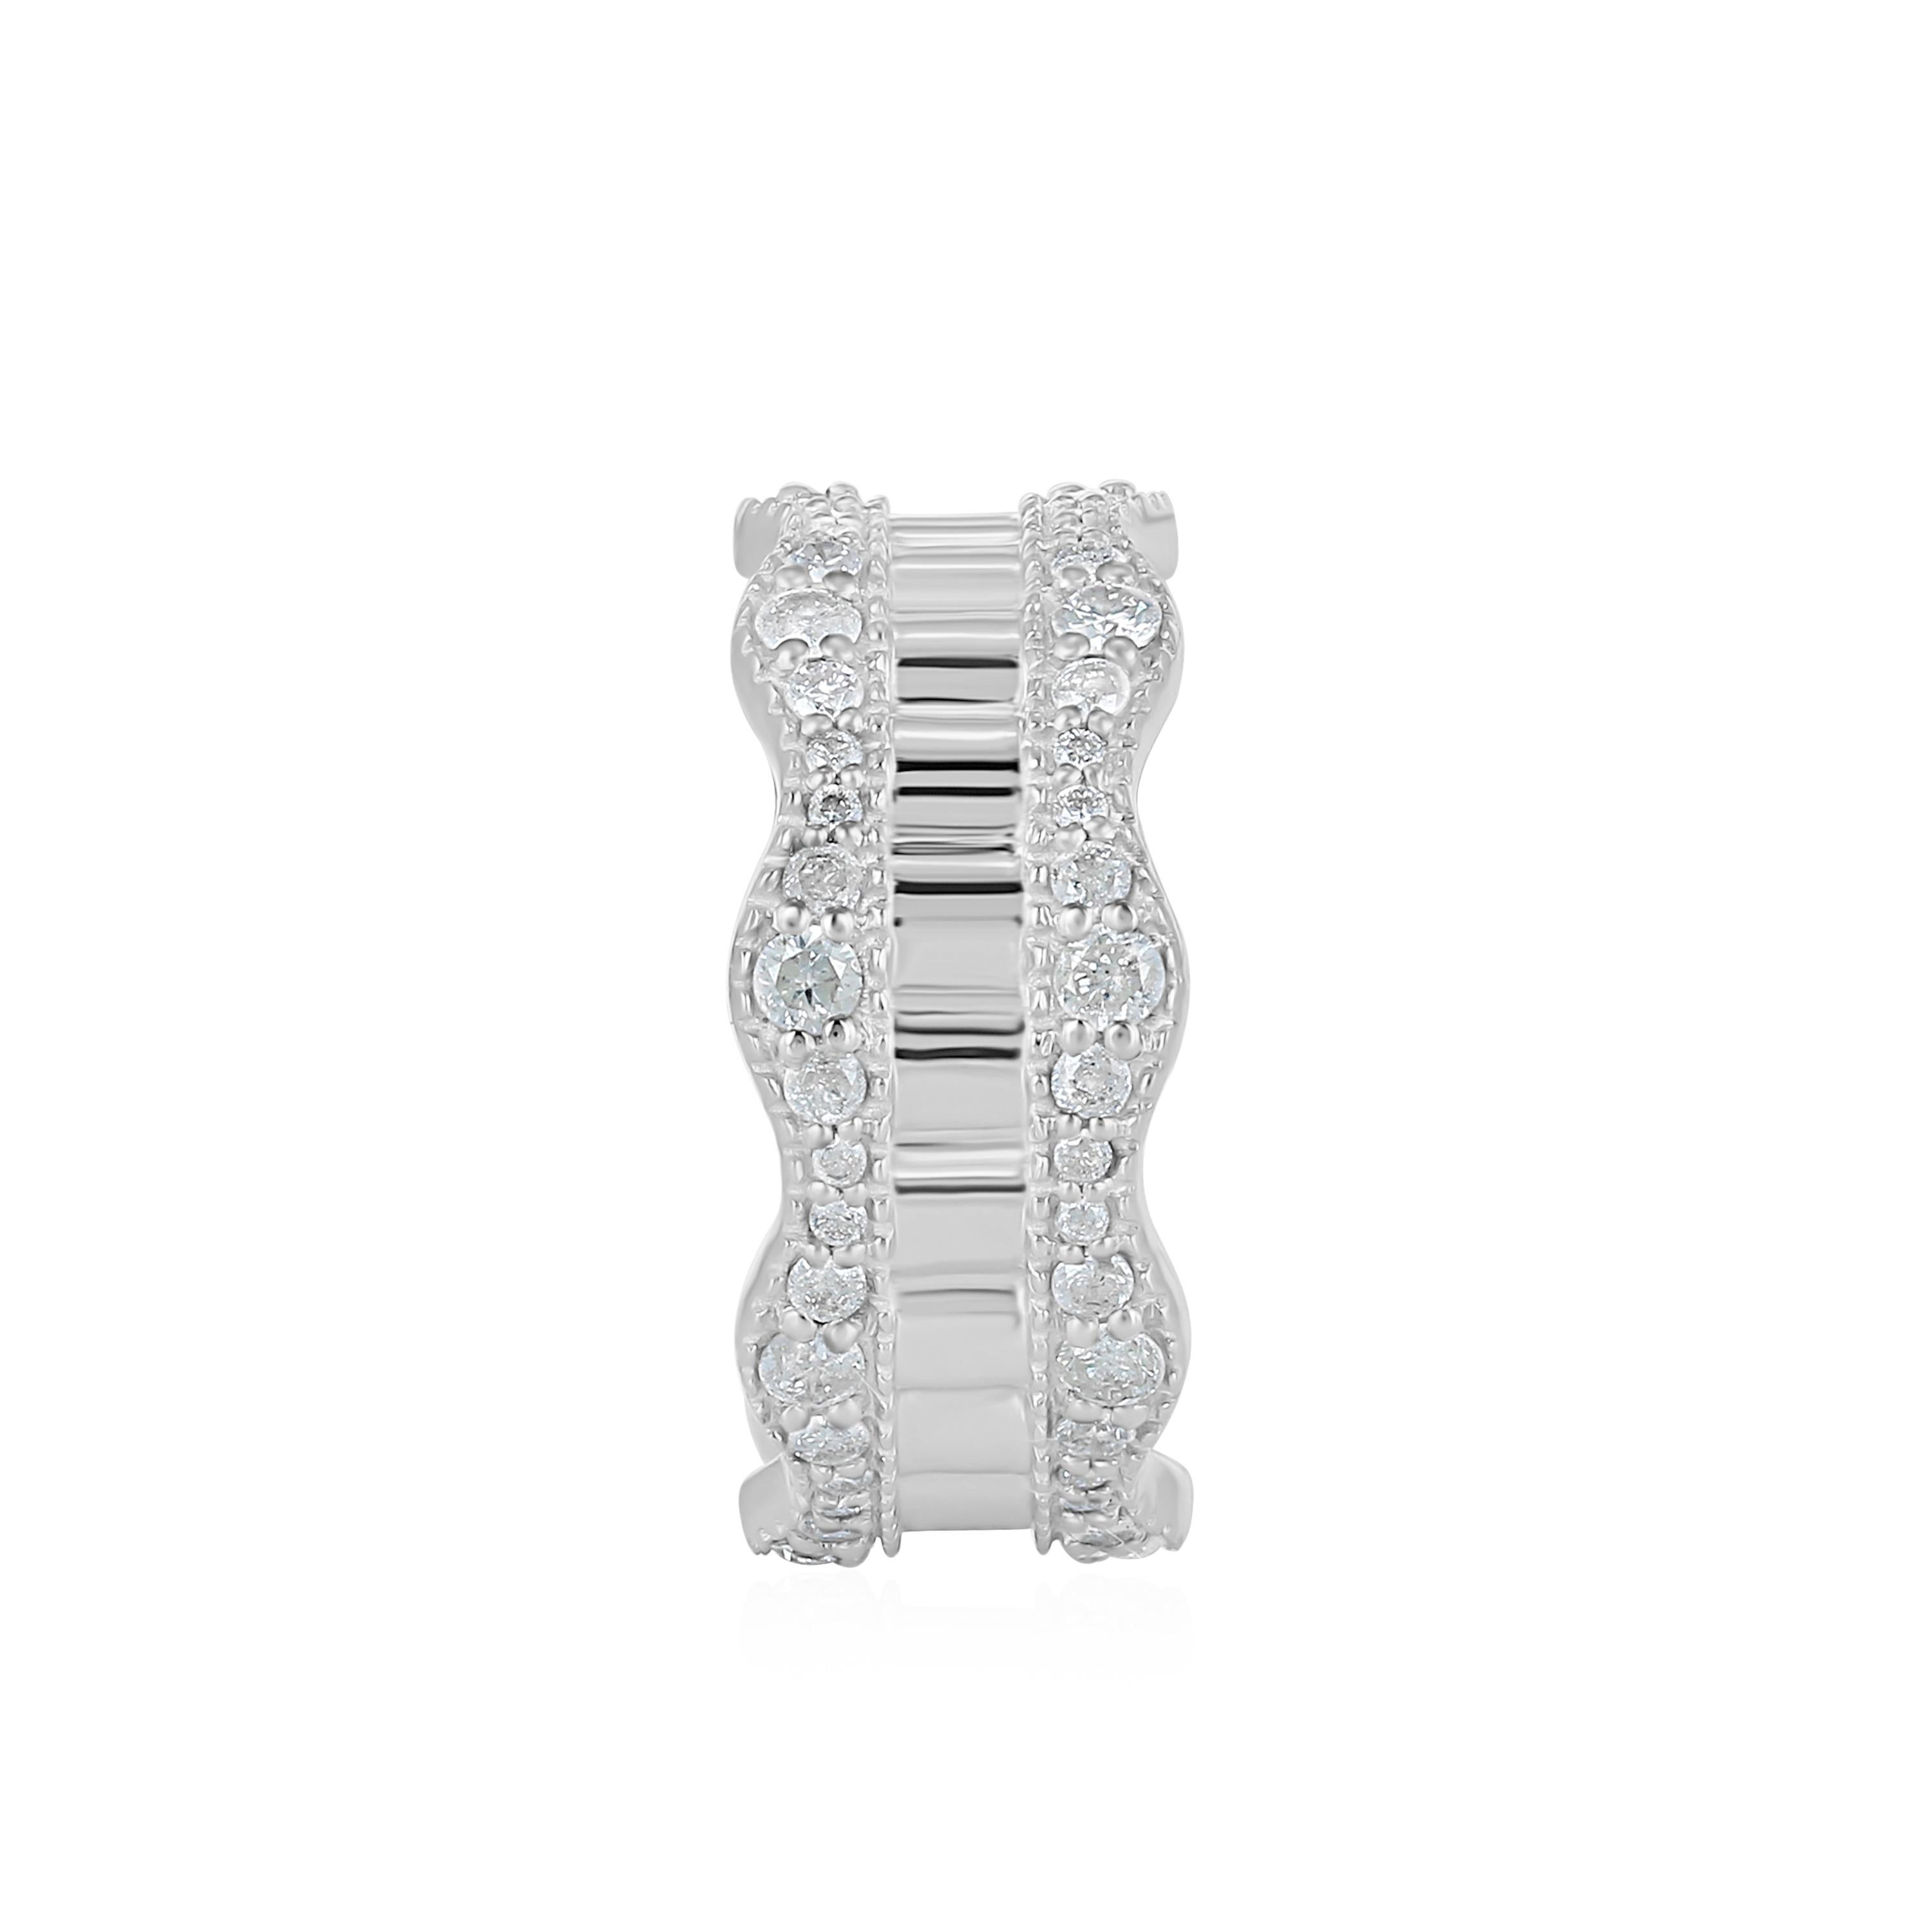 Contemporary Gemisty 1.22cttw. Diamond Eternity Band Ring in 925 Sterling Silver For Sale